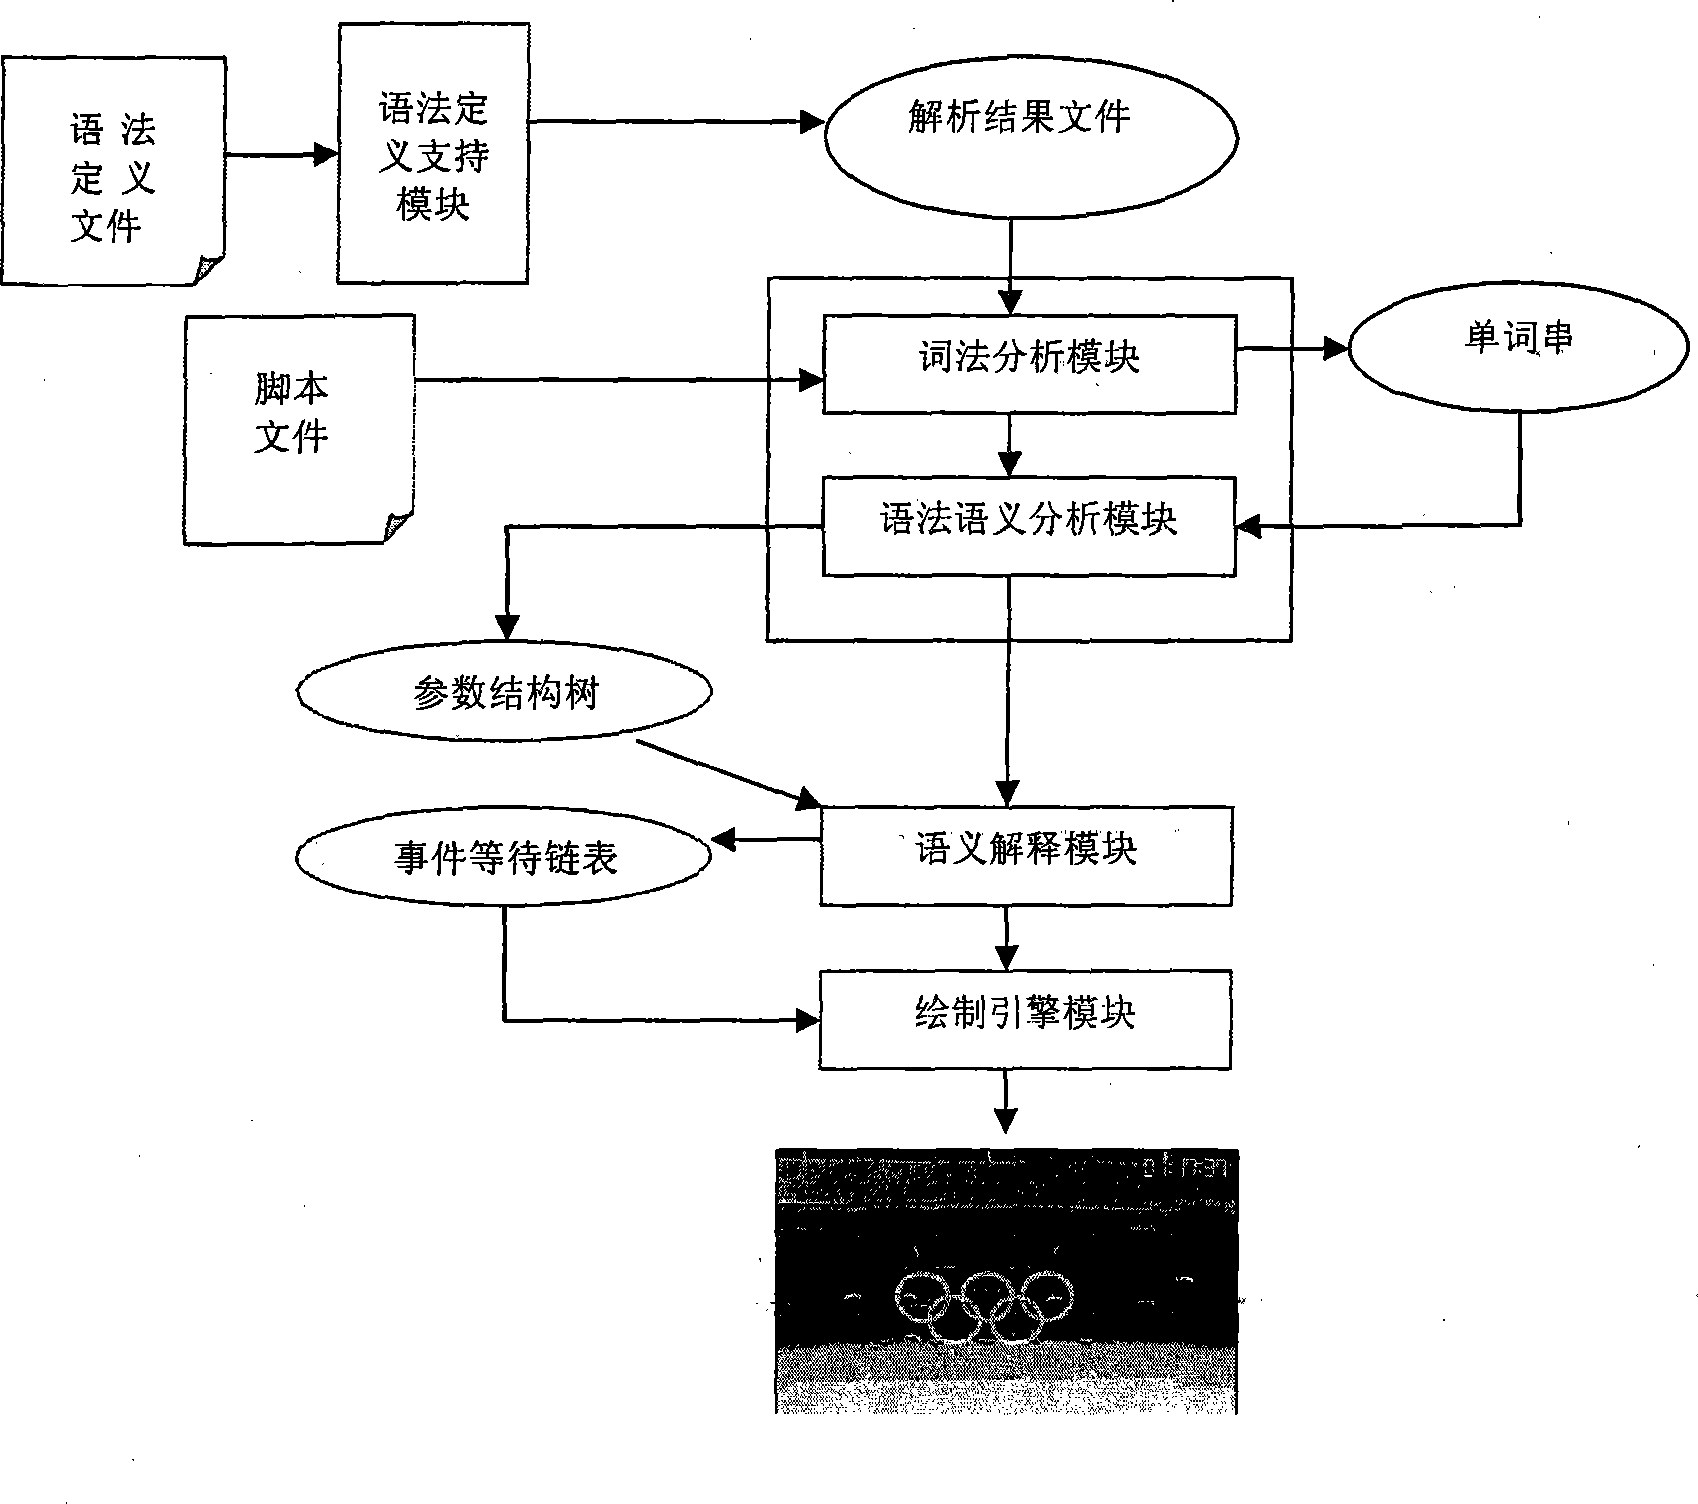 Three-dimensional object control oriented script language system and control method